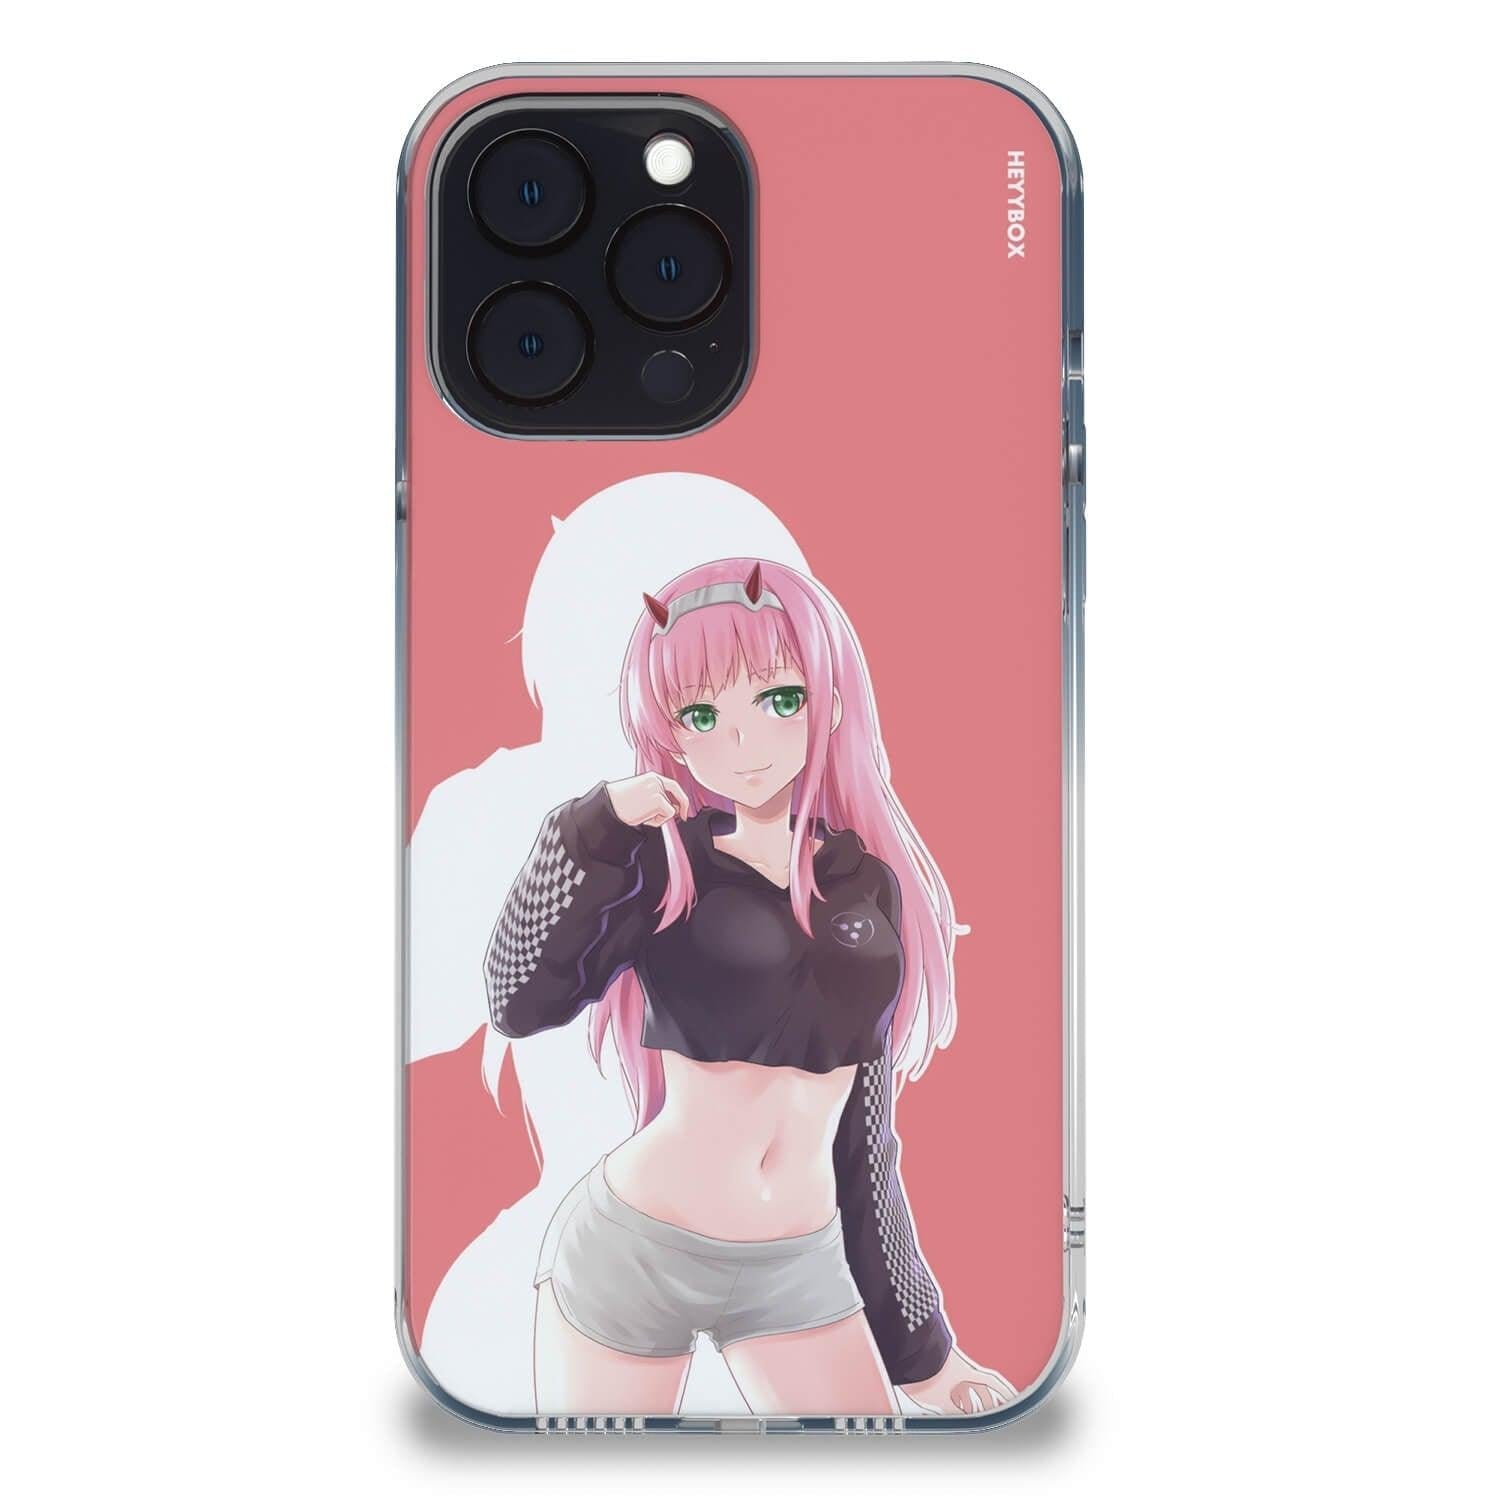 Cute 002 RGB Case for iPhone